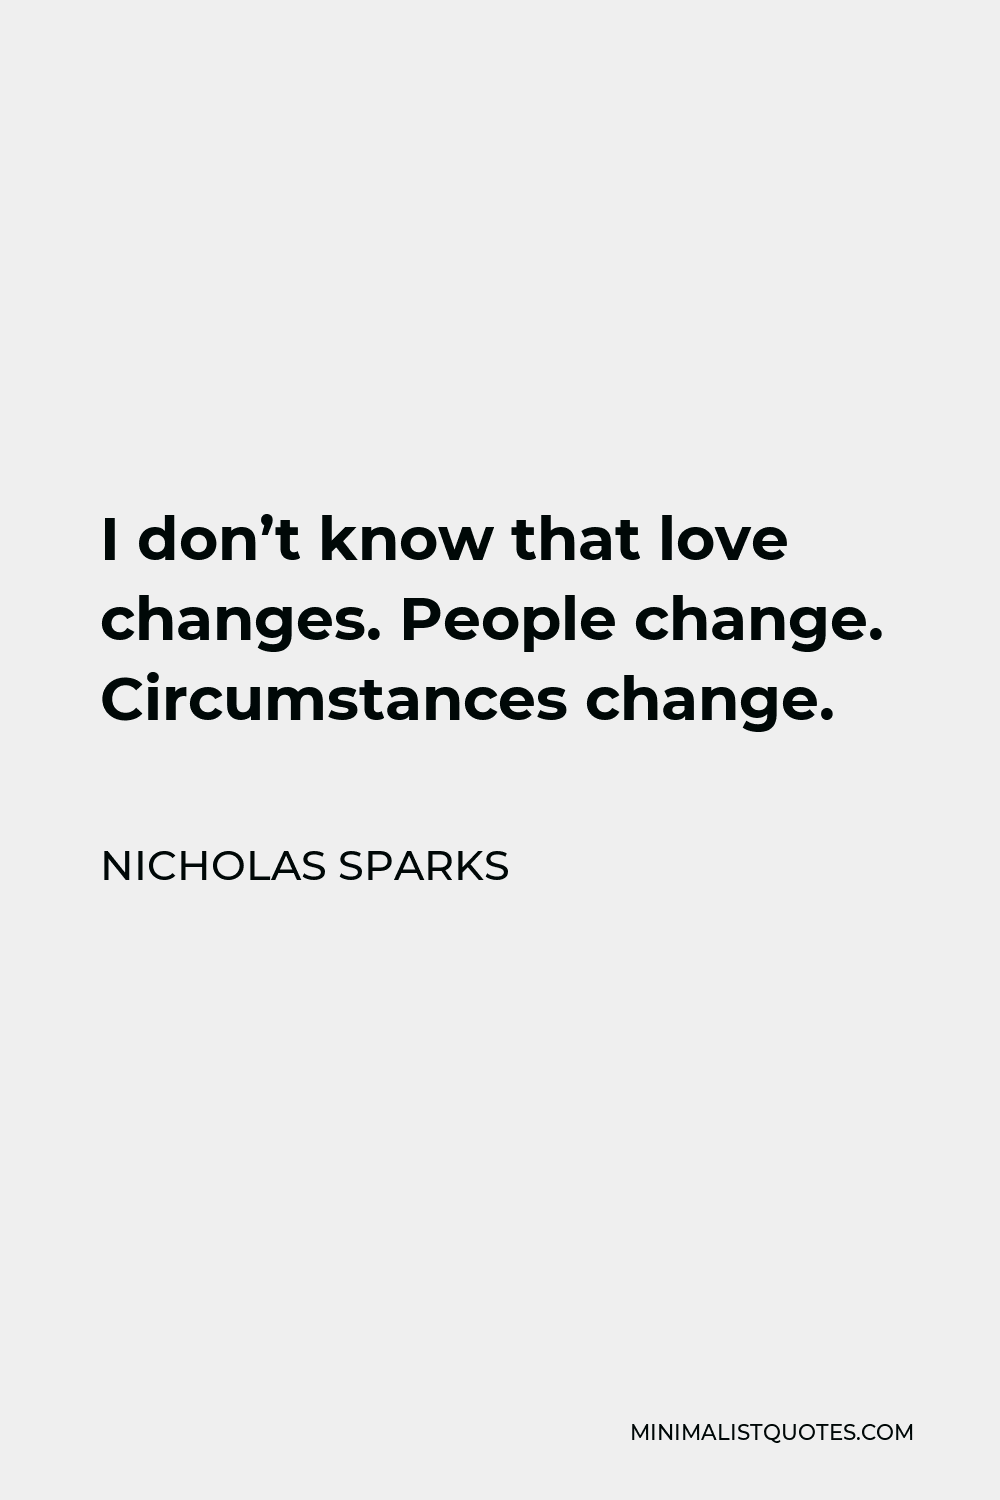 Nicholas Sparks Quote - I don’t know that love changes. People change. Circumstances change.